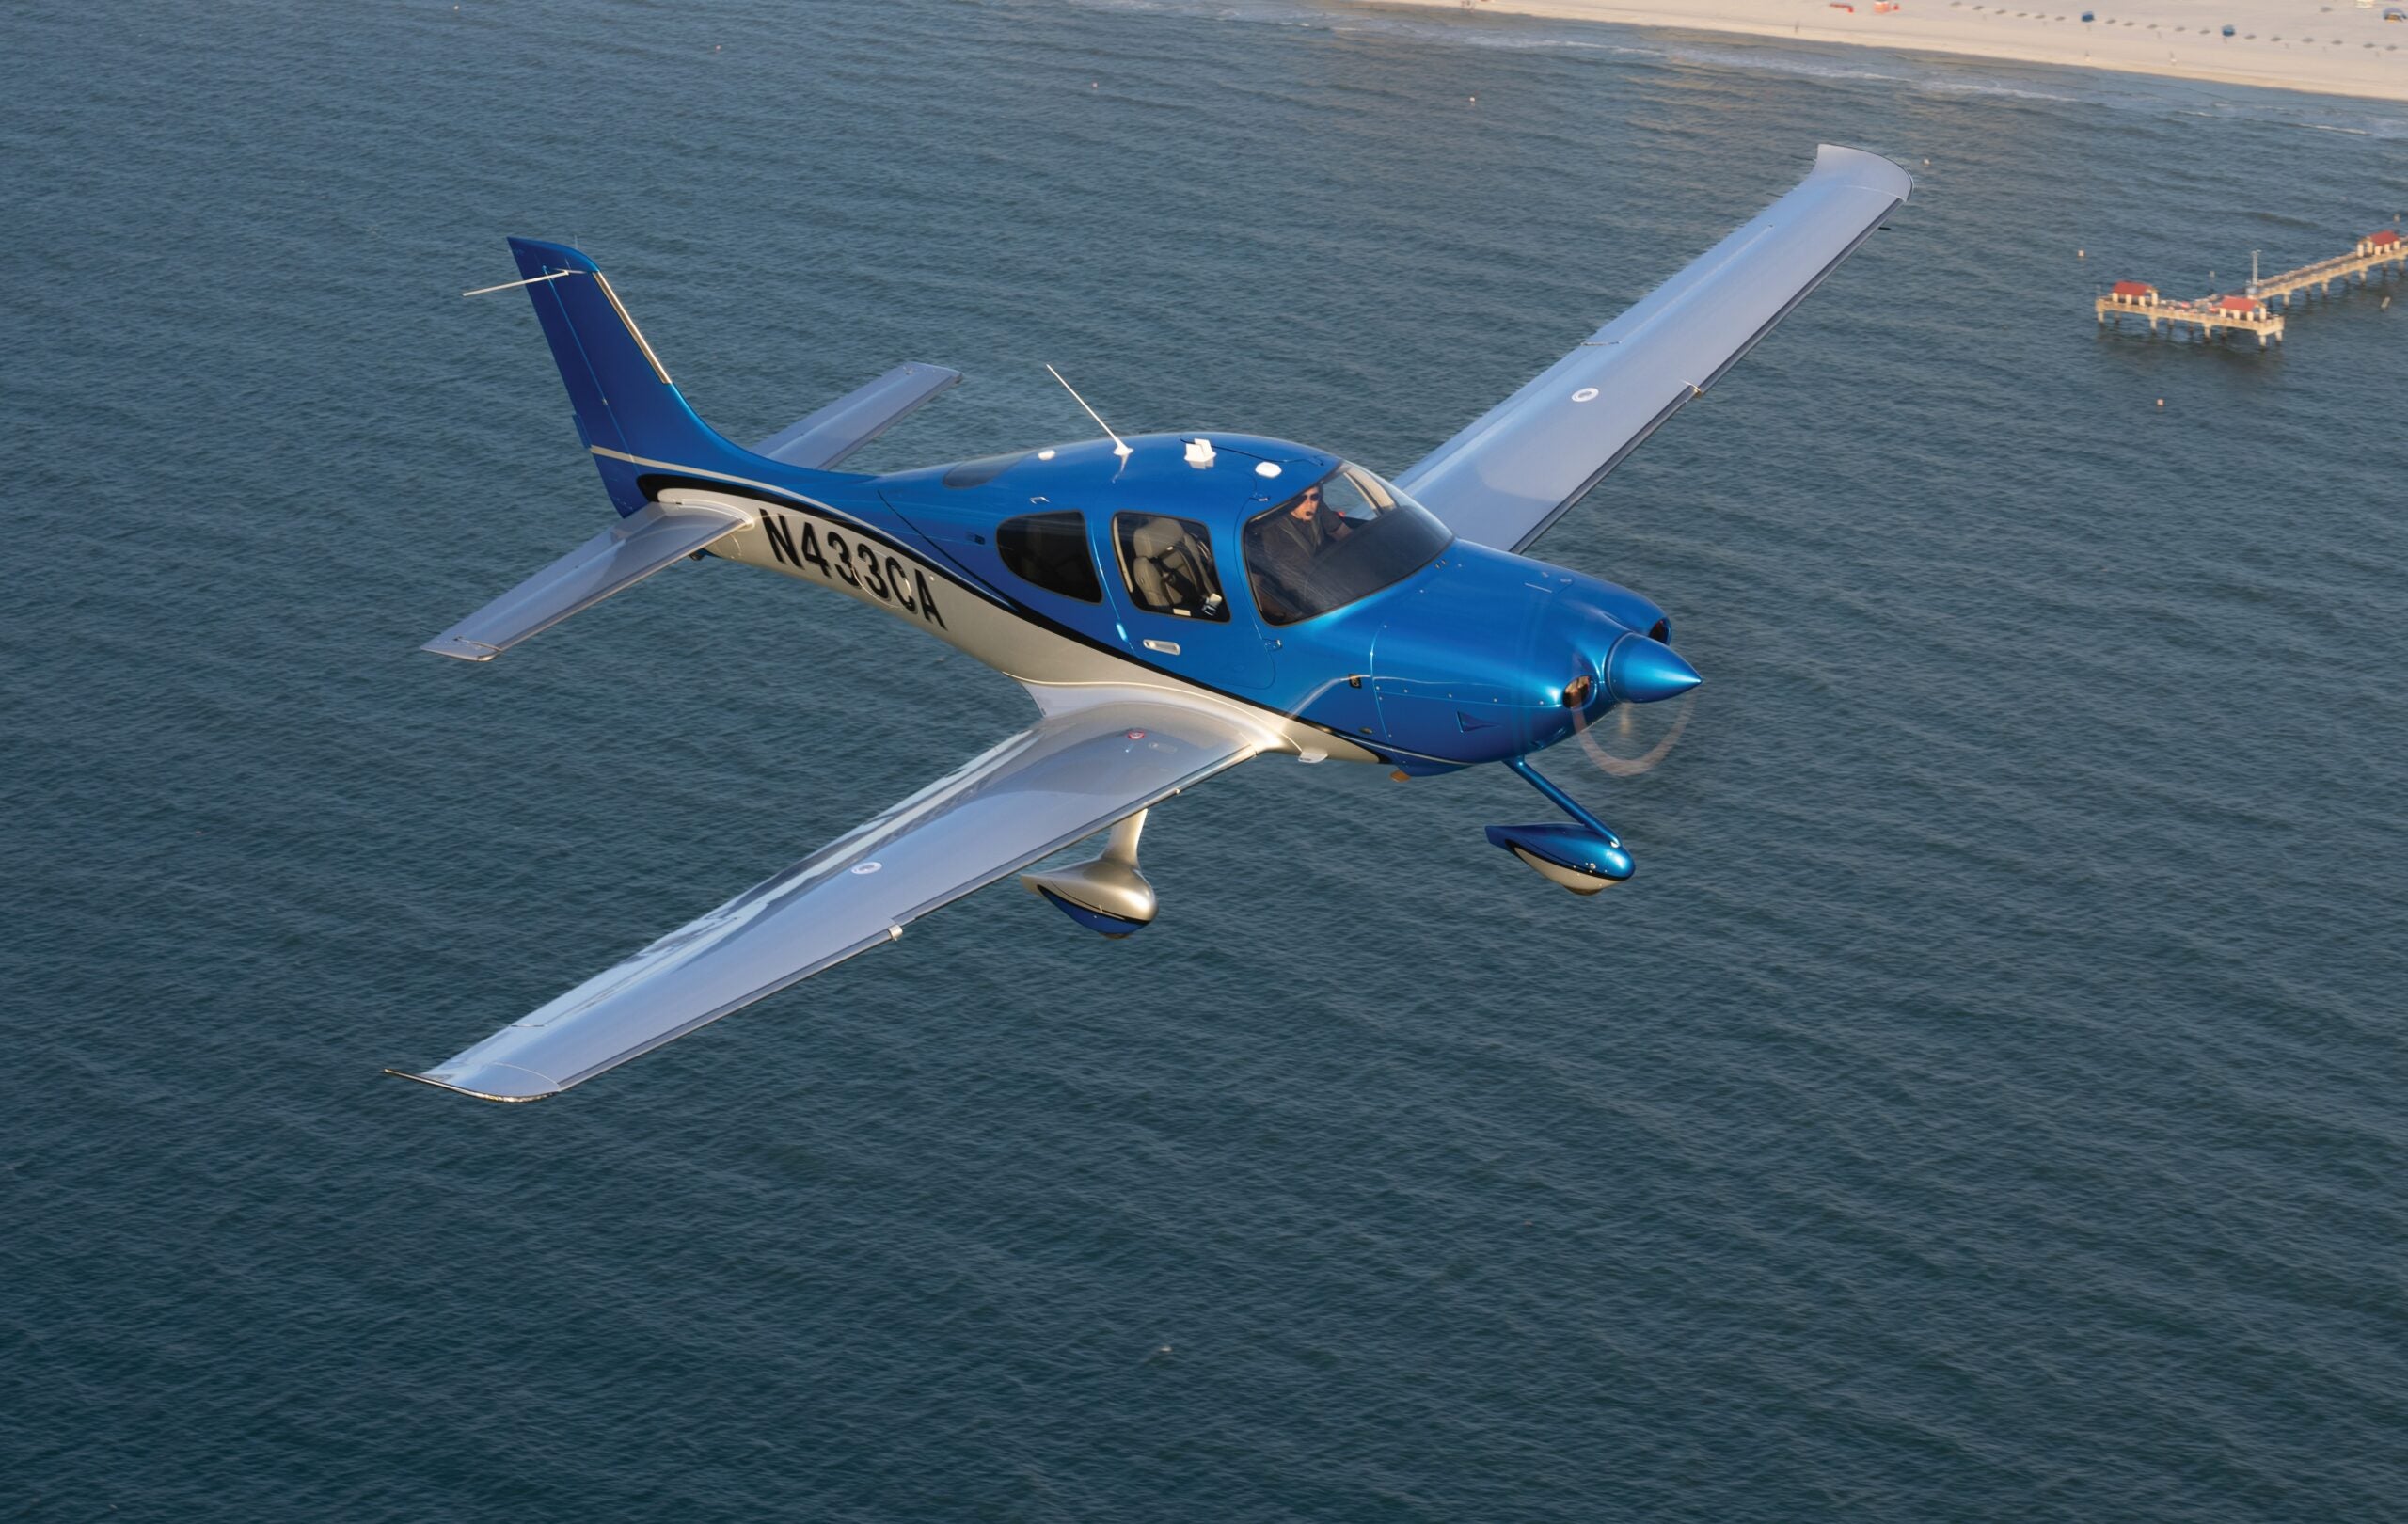 Dream Aircraft: What Can You Fly?